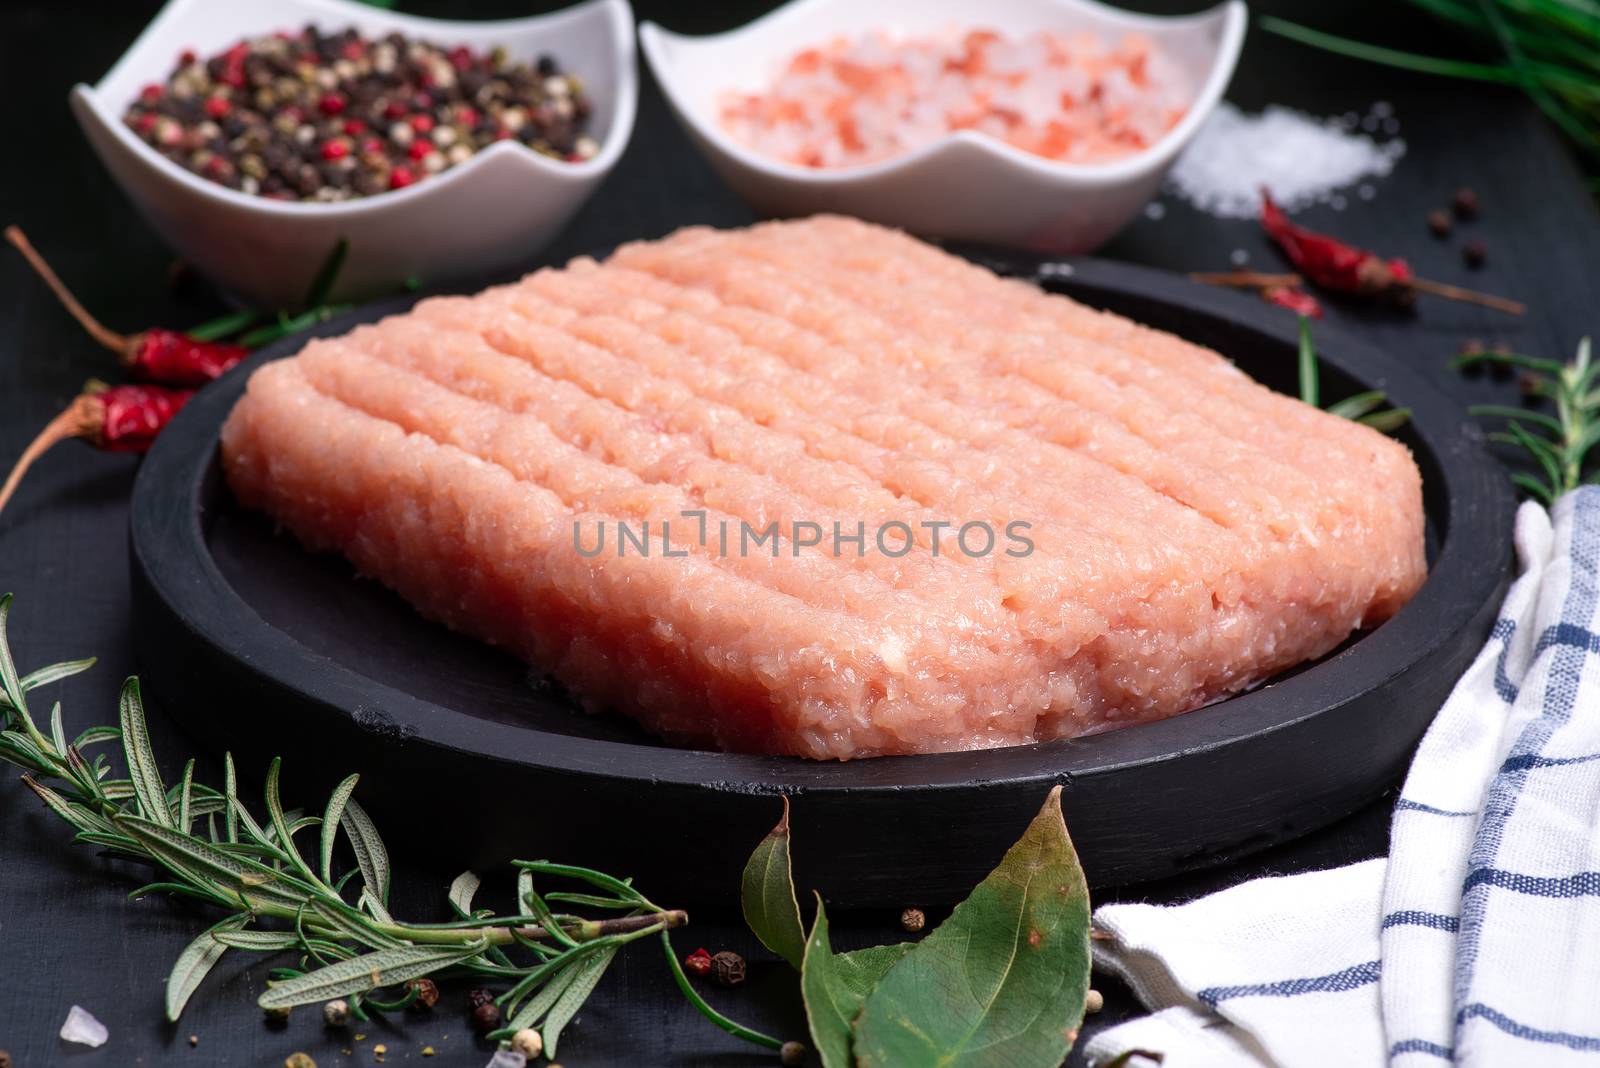 Raw minced chicken on a black plate on a wooden table. Top view. Minced chicken close-up. Raw Minced meat with herbs and spices by nkooume